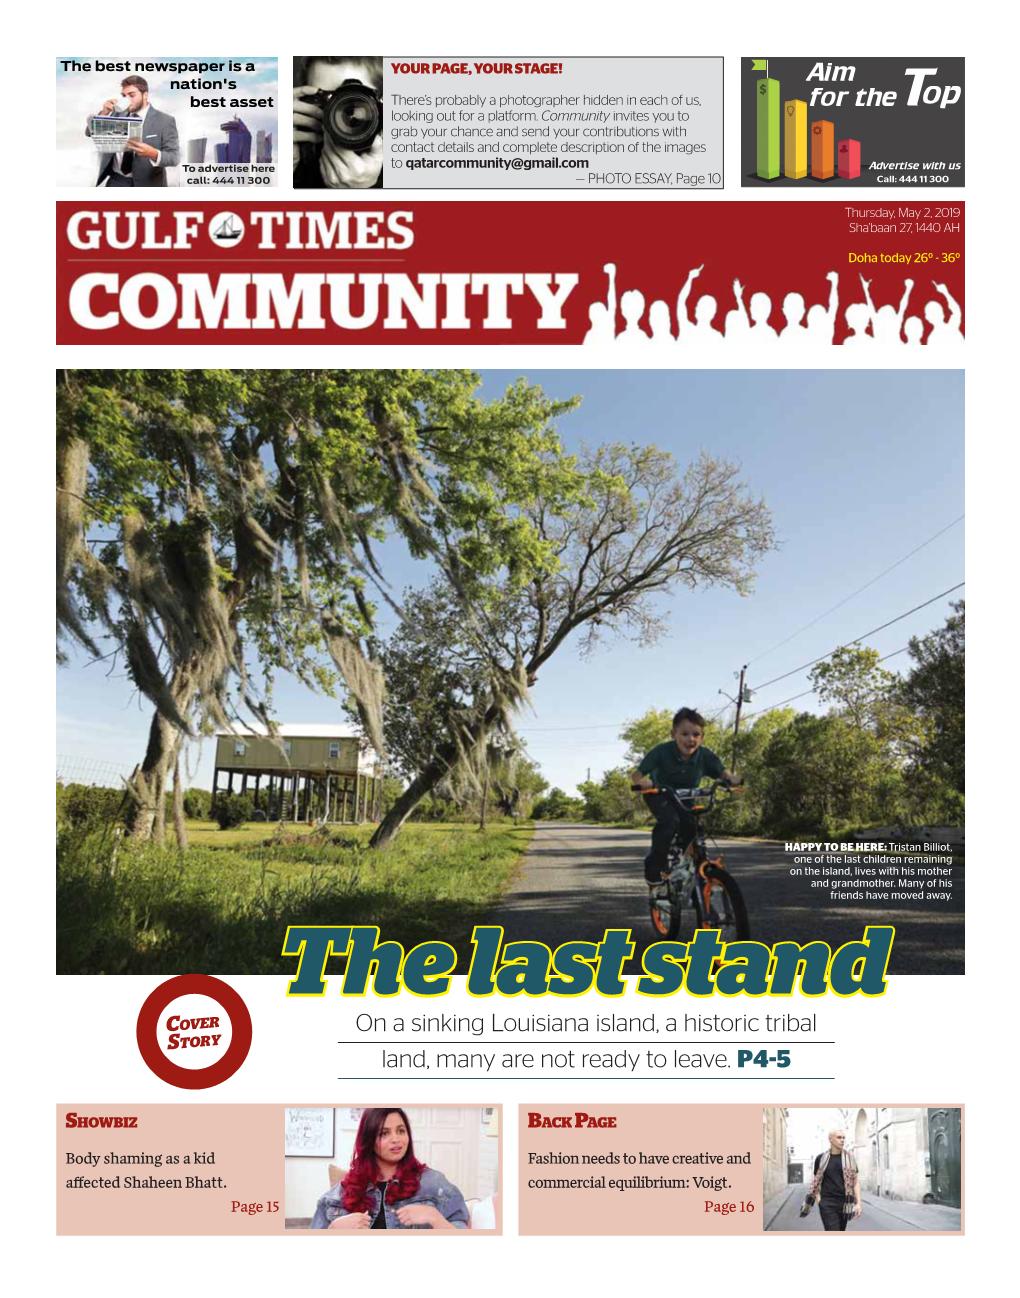 On a Sinking Louisiana Island, a Historic Tribal Land, Many Are Not Ready to Leave. P4-5